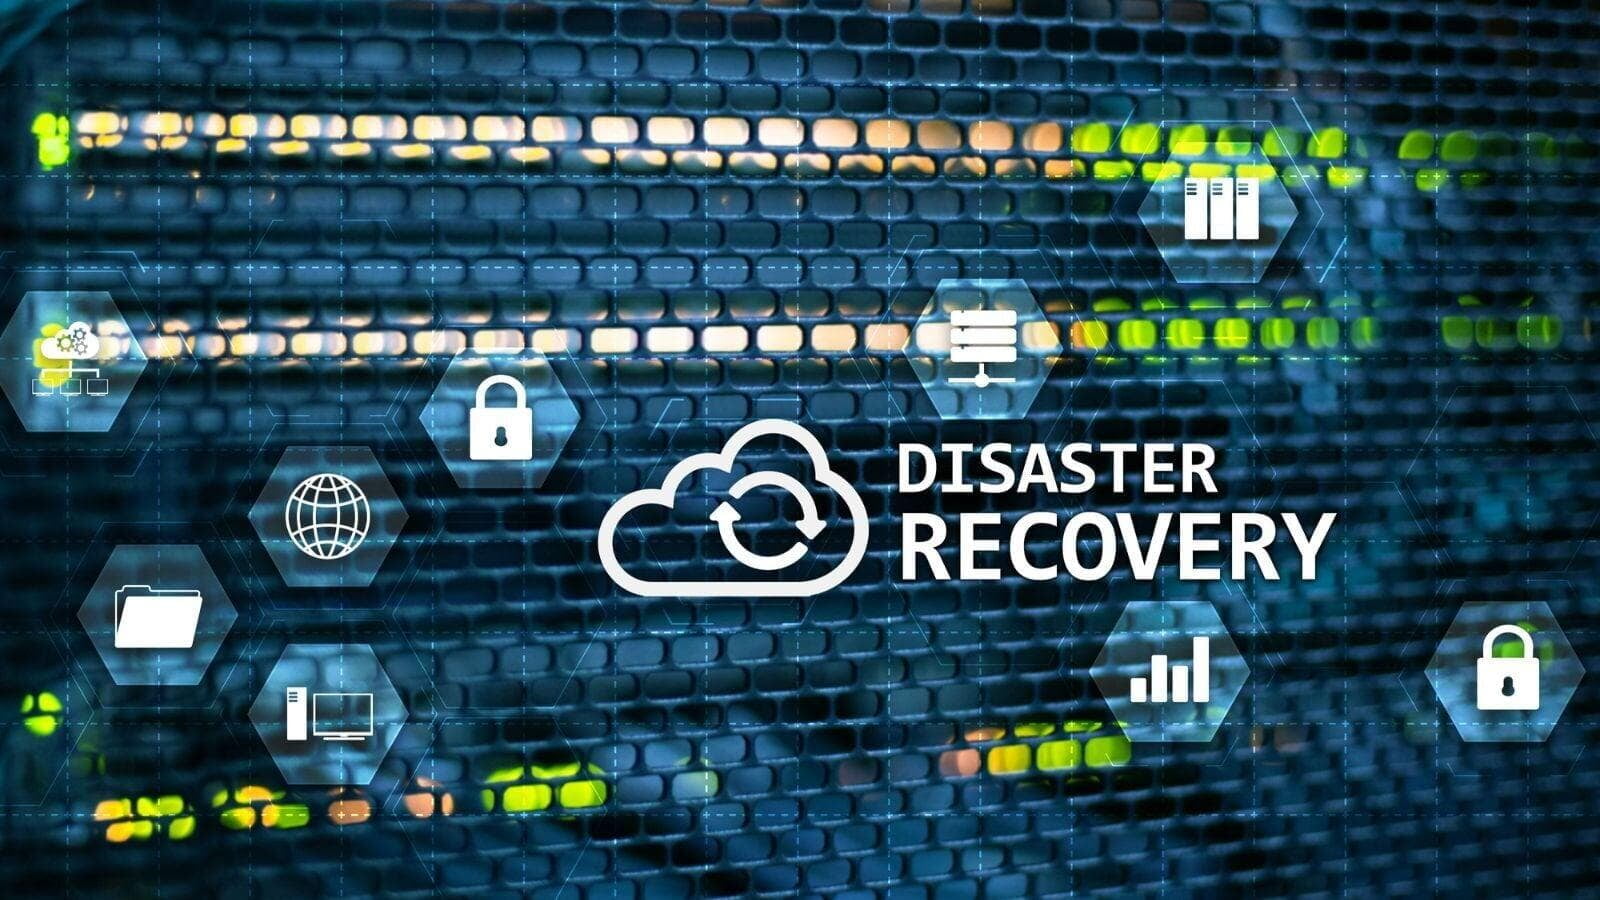 The True Cost of Downtime Without a Disaster Recovery Plan